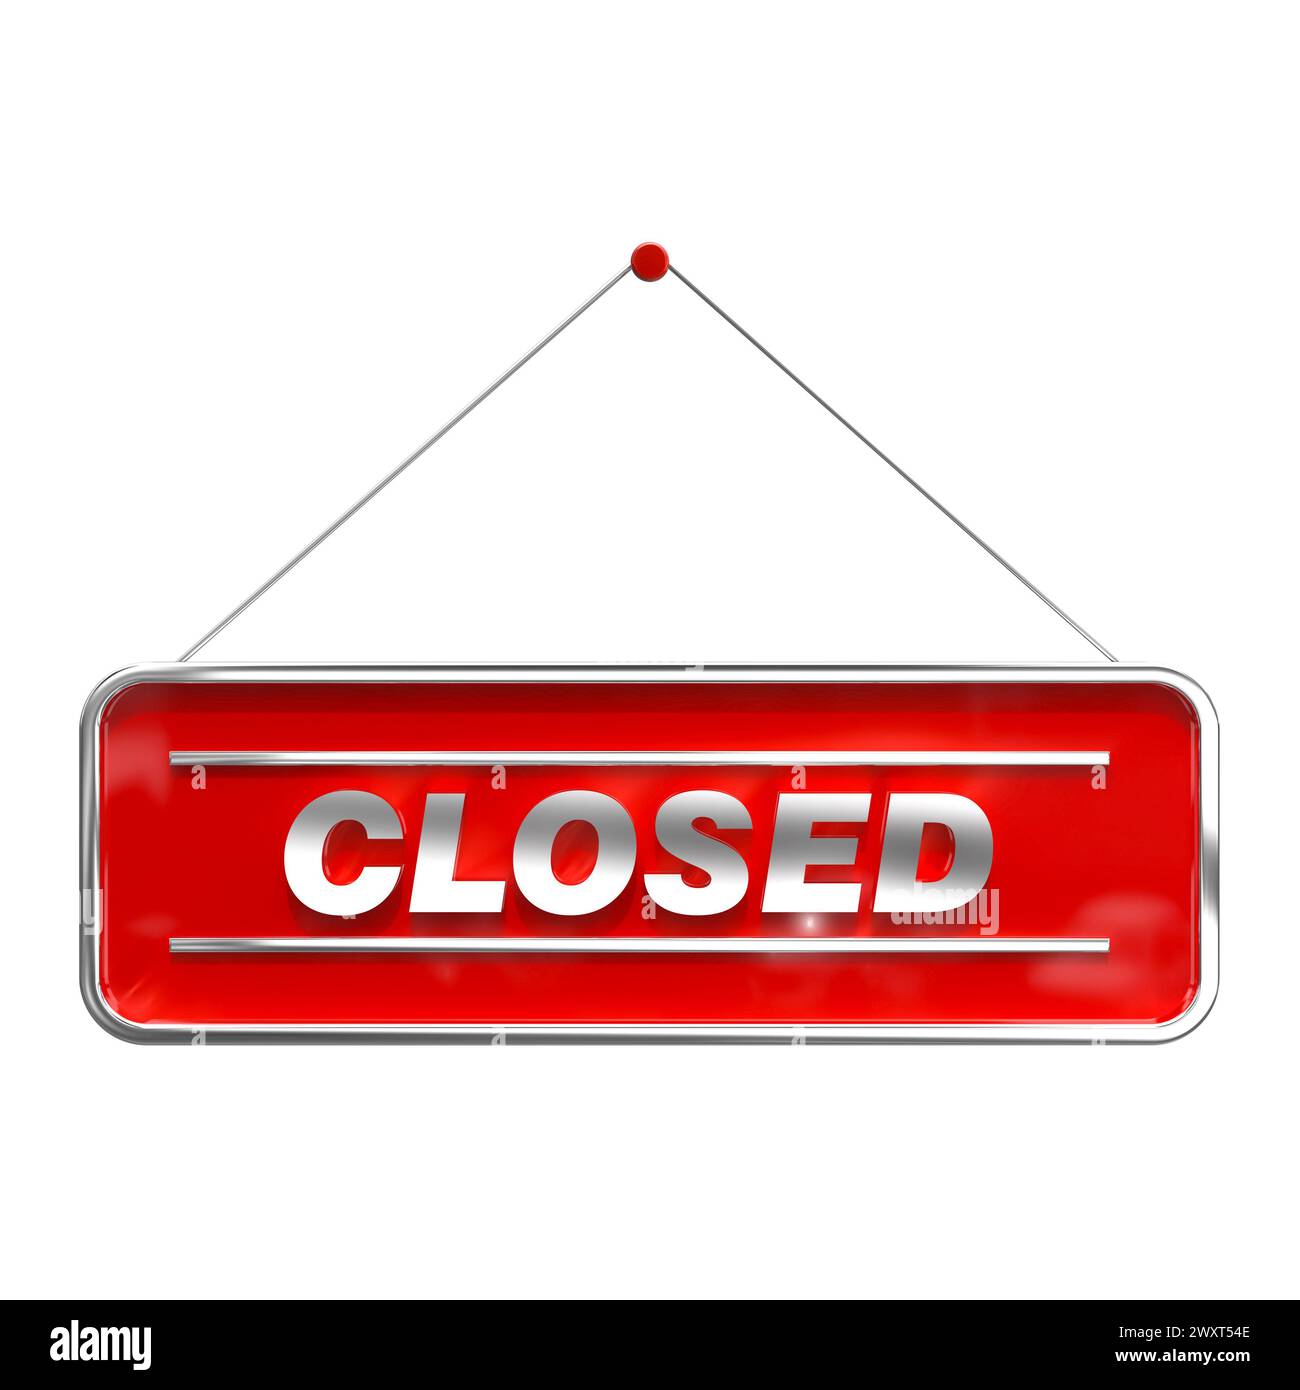 3d rendered red and white closed sign with a metallic border, isolated on a white background Stock Photo